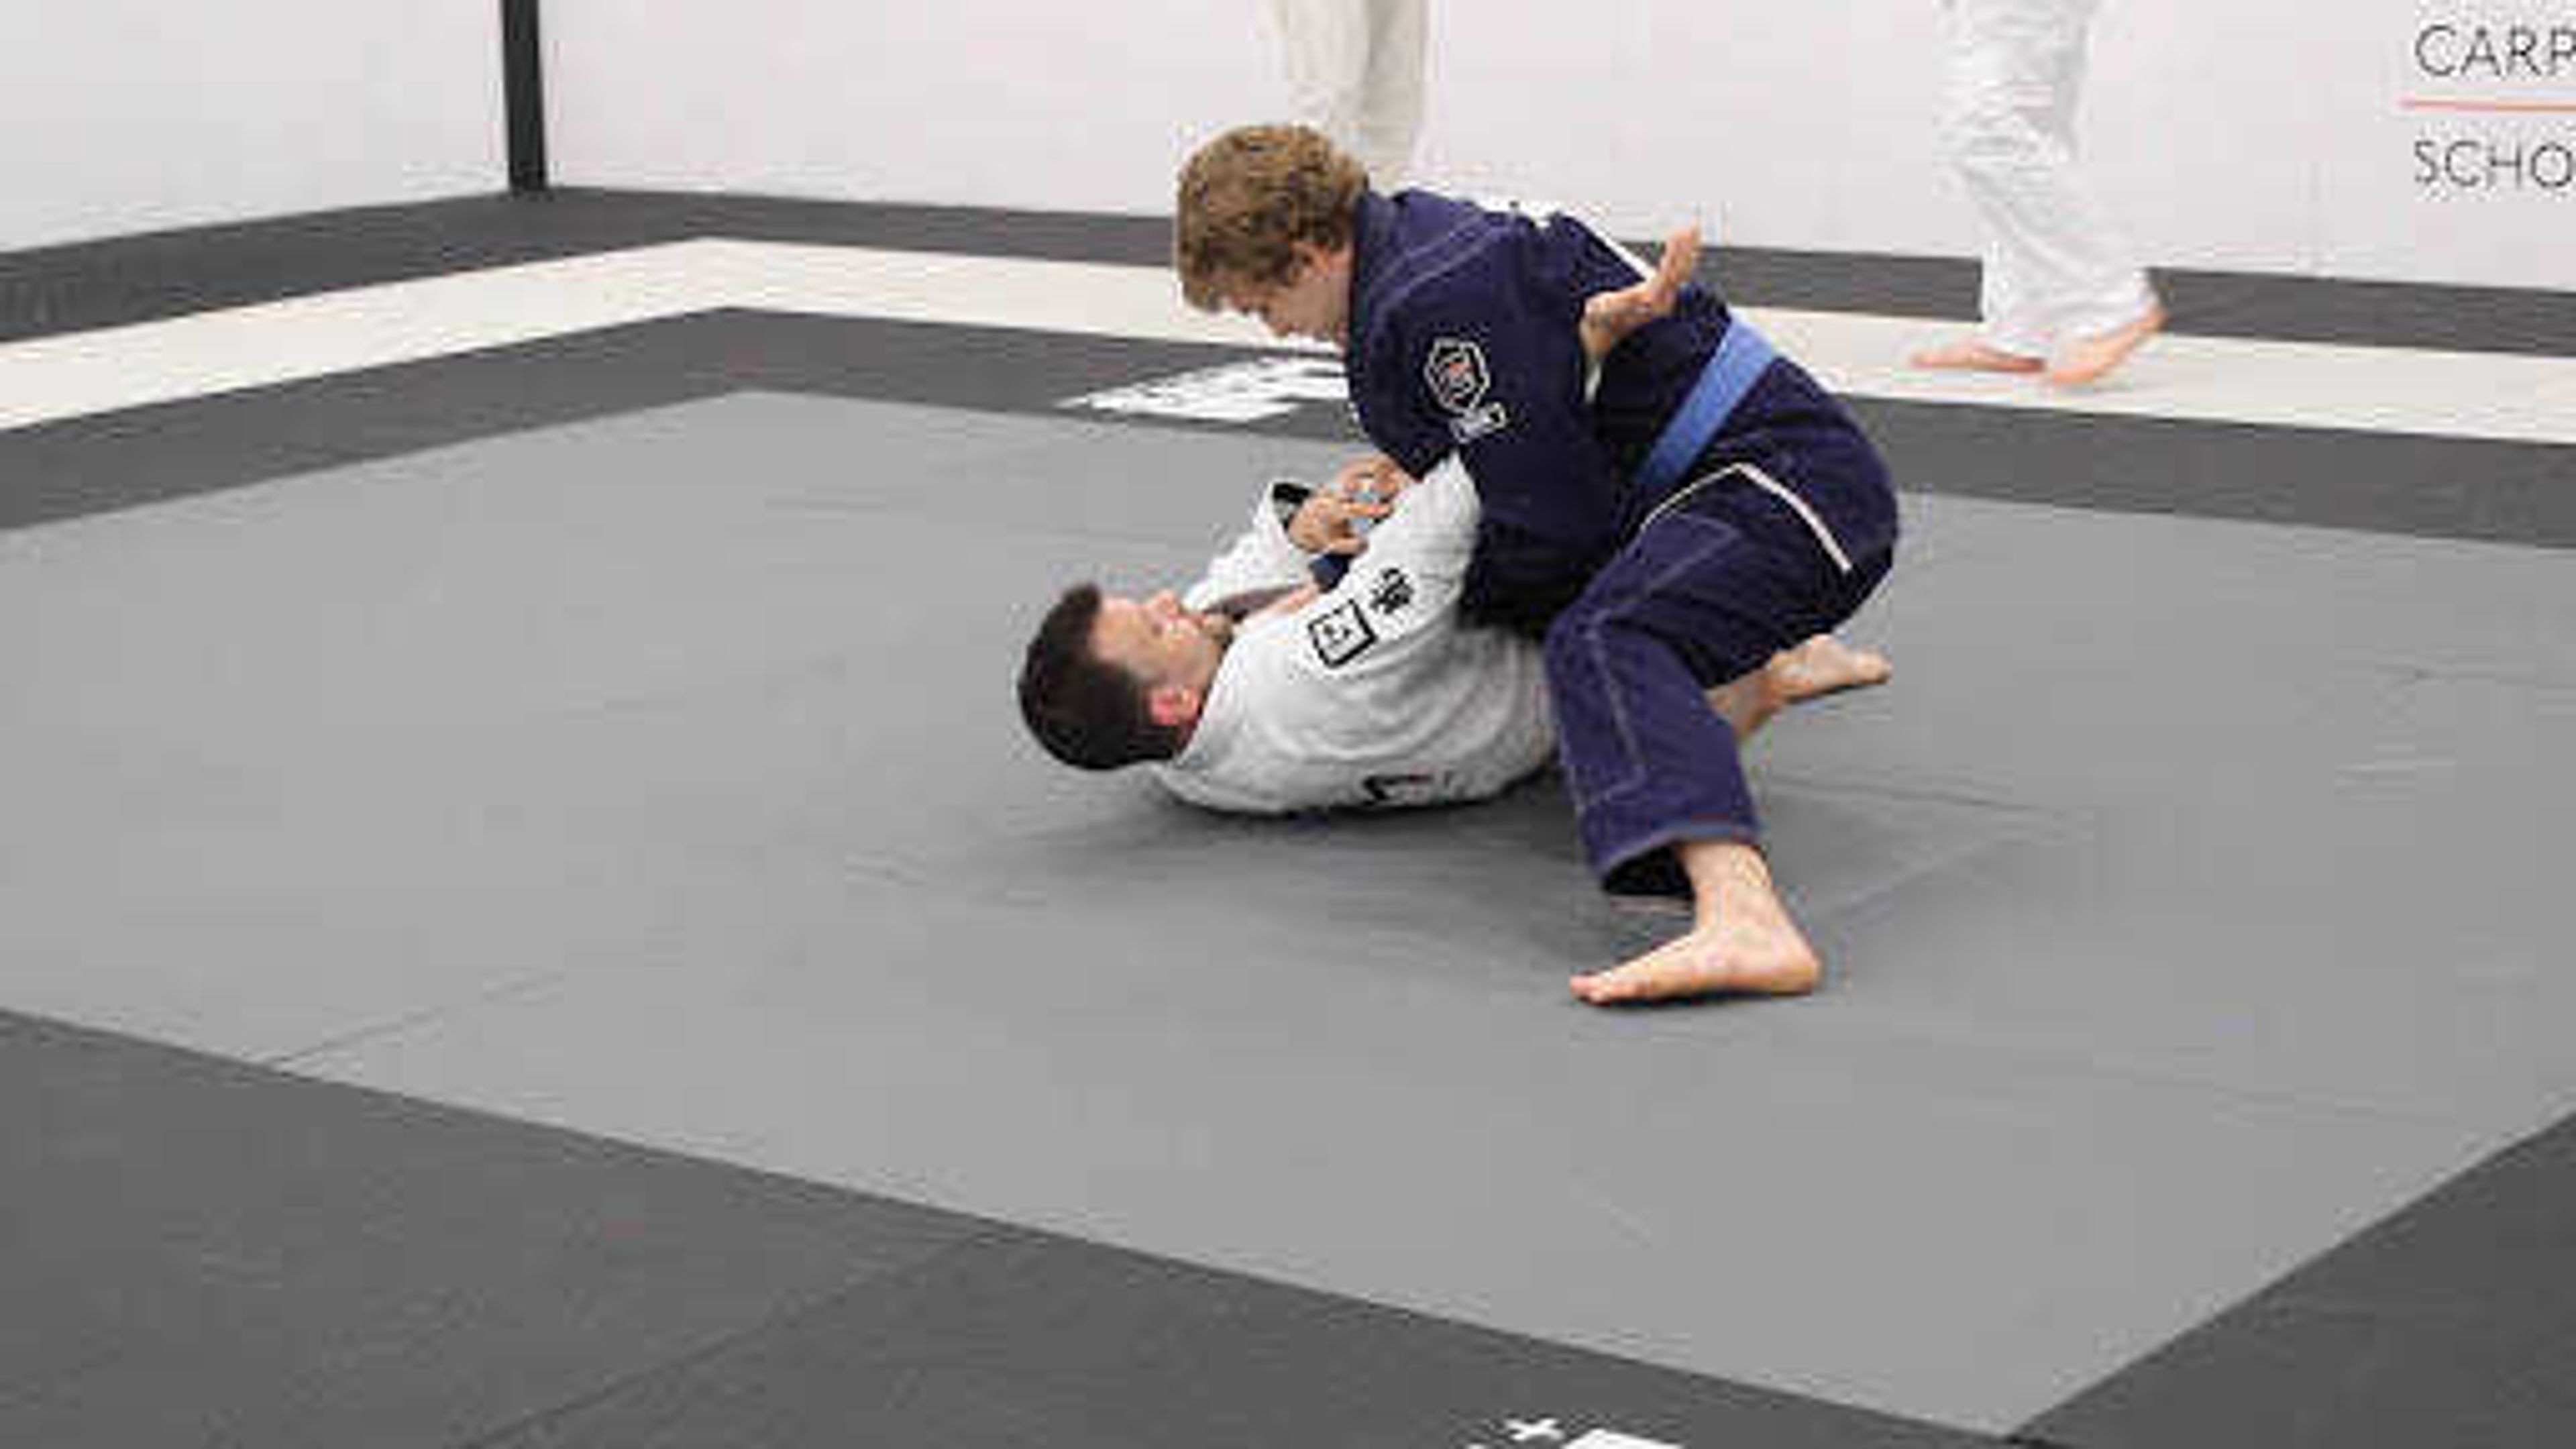 Preston Holifield and instructor John Dudley work on an arm bar technique during class at the Carpe Momentum School of Jiu Jitsu on February 19th.